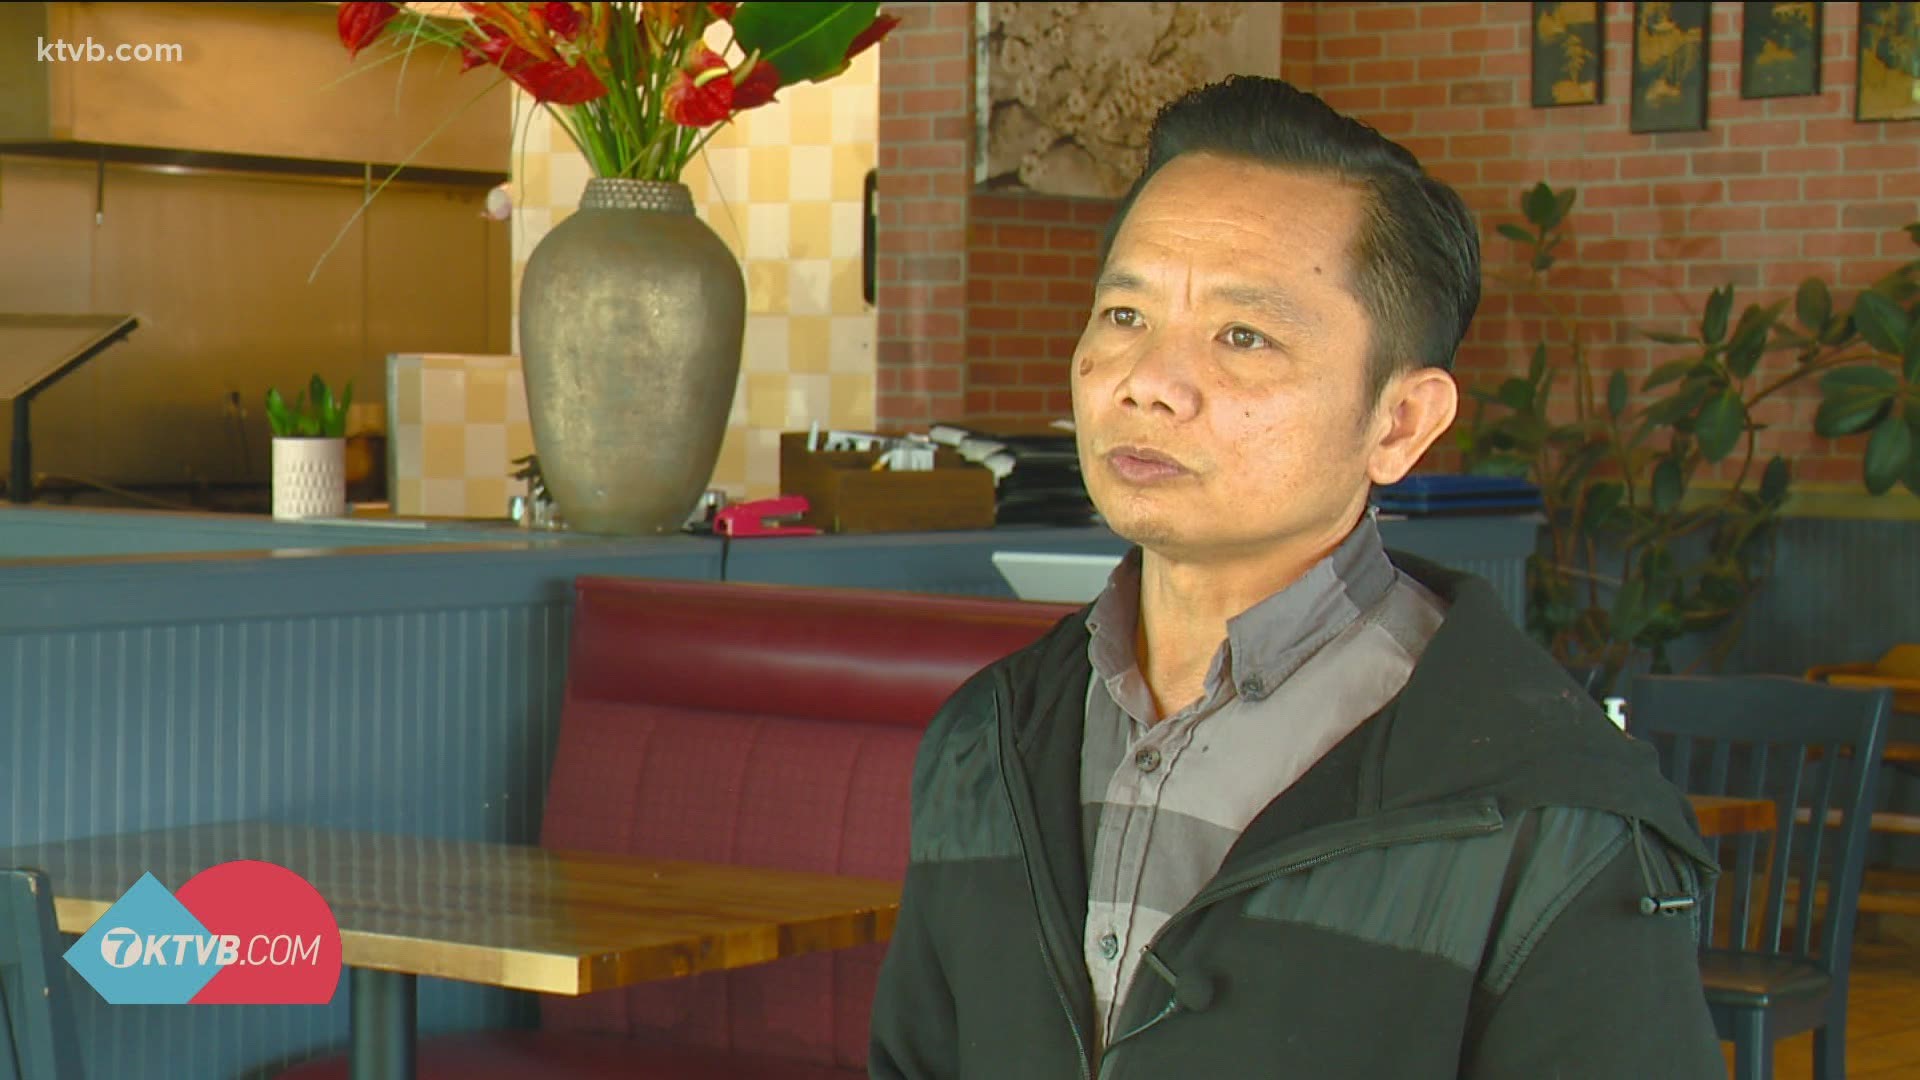 An Ngyuen is struggling to find workers for his pho restaurants, so he has to rely on his wife and father to help out.